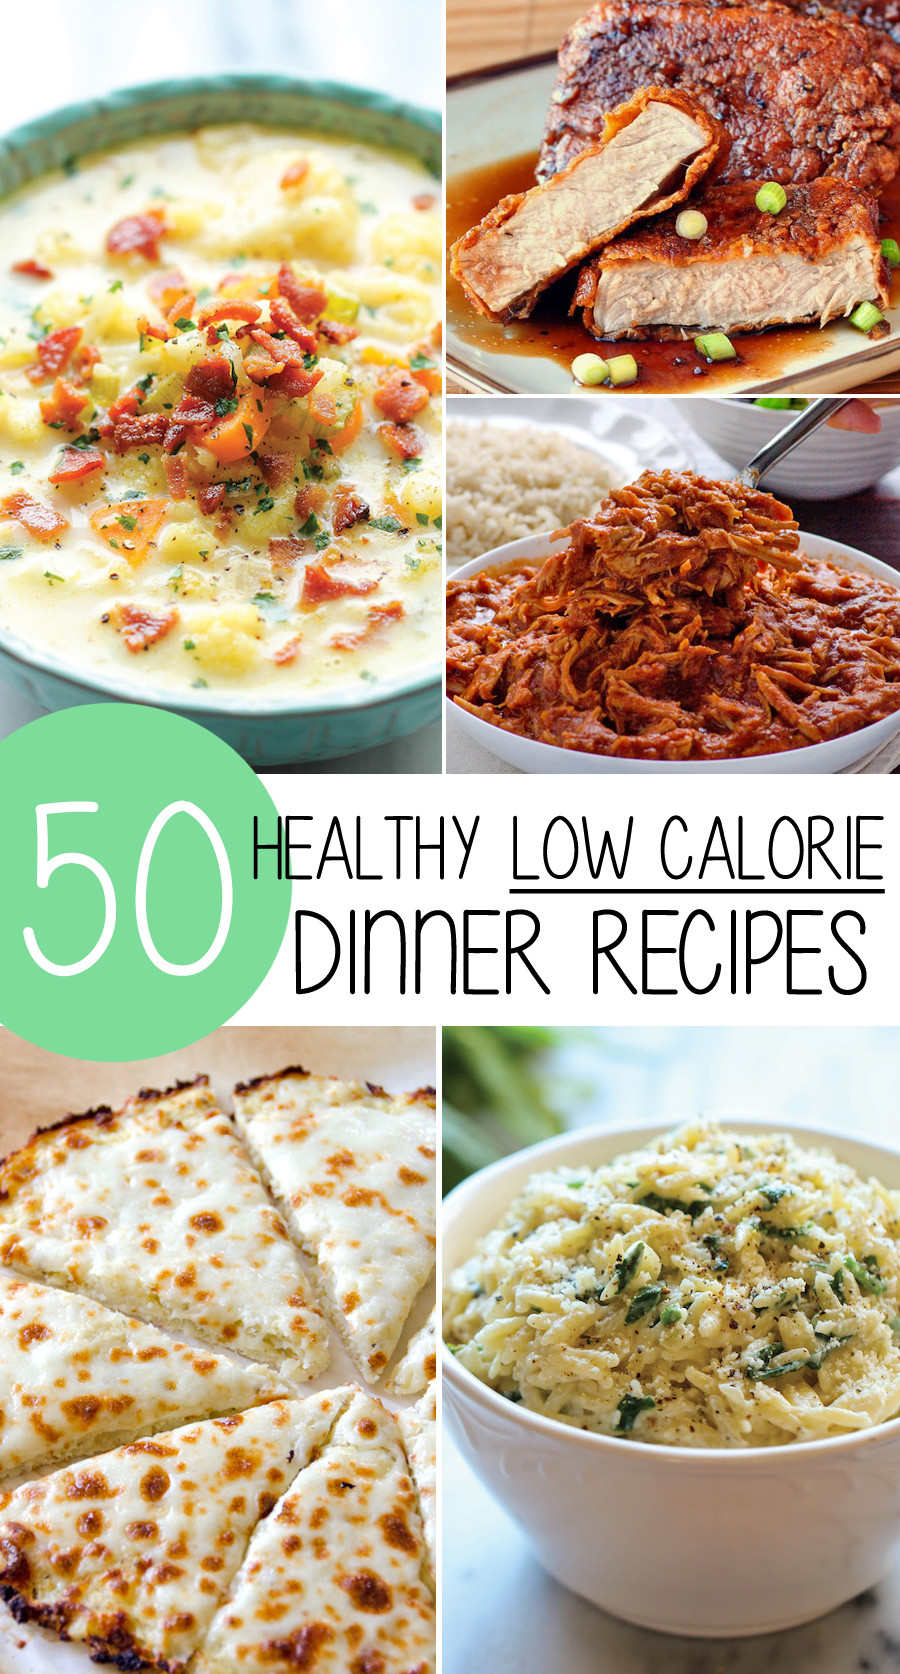 Low Calorie Recipes New 50 Healthy Low Calorie Weight Loss Dinner Recipes